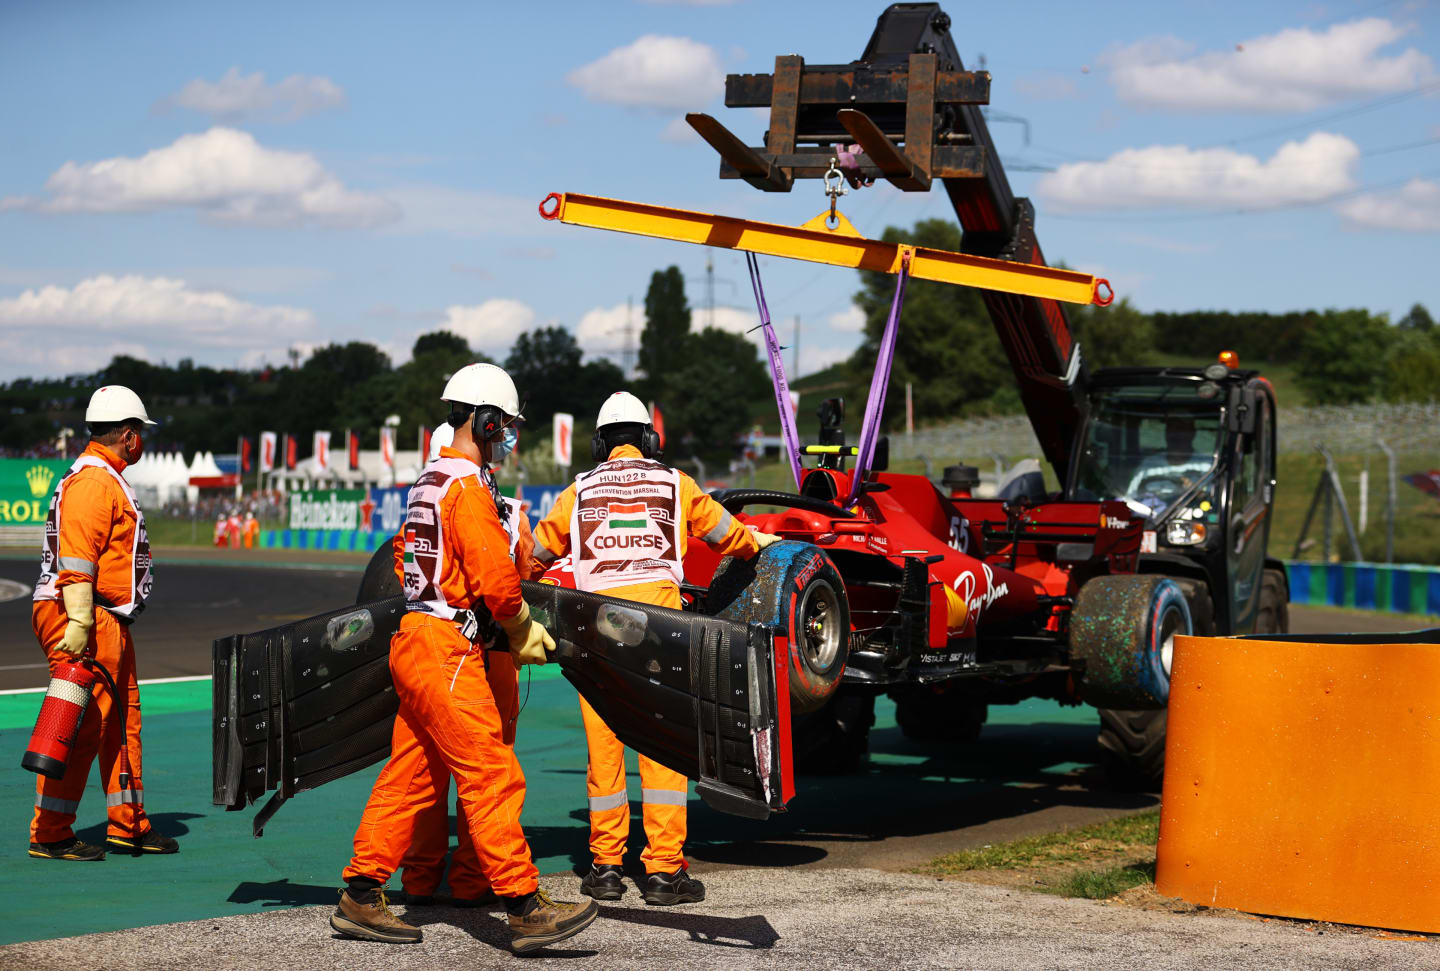 BUDAPEST, HUNGARY - JULY 31: The car of Carlos Sainz of Spain and Ferrari is removed from the track after a crash during qualifying ahead of the F1 Grand Prix of Hungary at Hungaroring on July 31, 2021 in Budapest, Hungary. (Photo by Bryn Lennon/Getty Images)